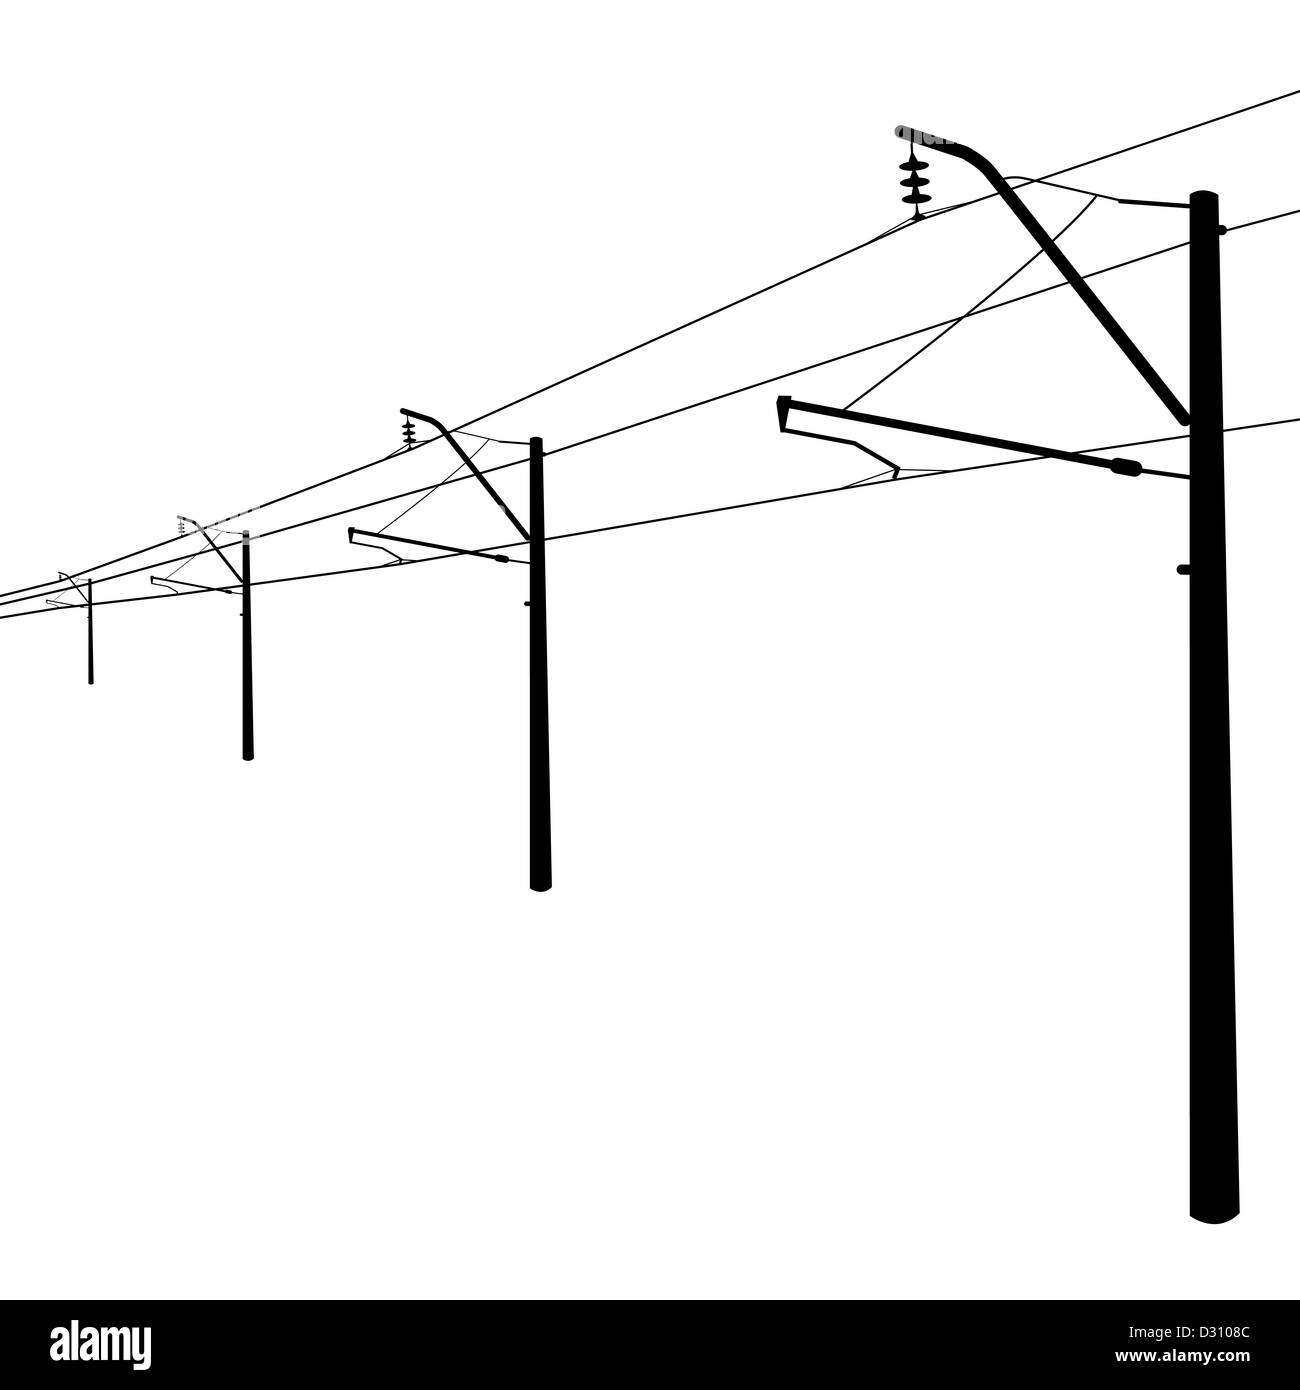 Railroad overhead lines. Contact wire.  illustration. Stock Photo